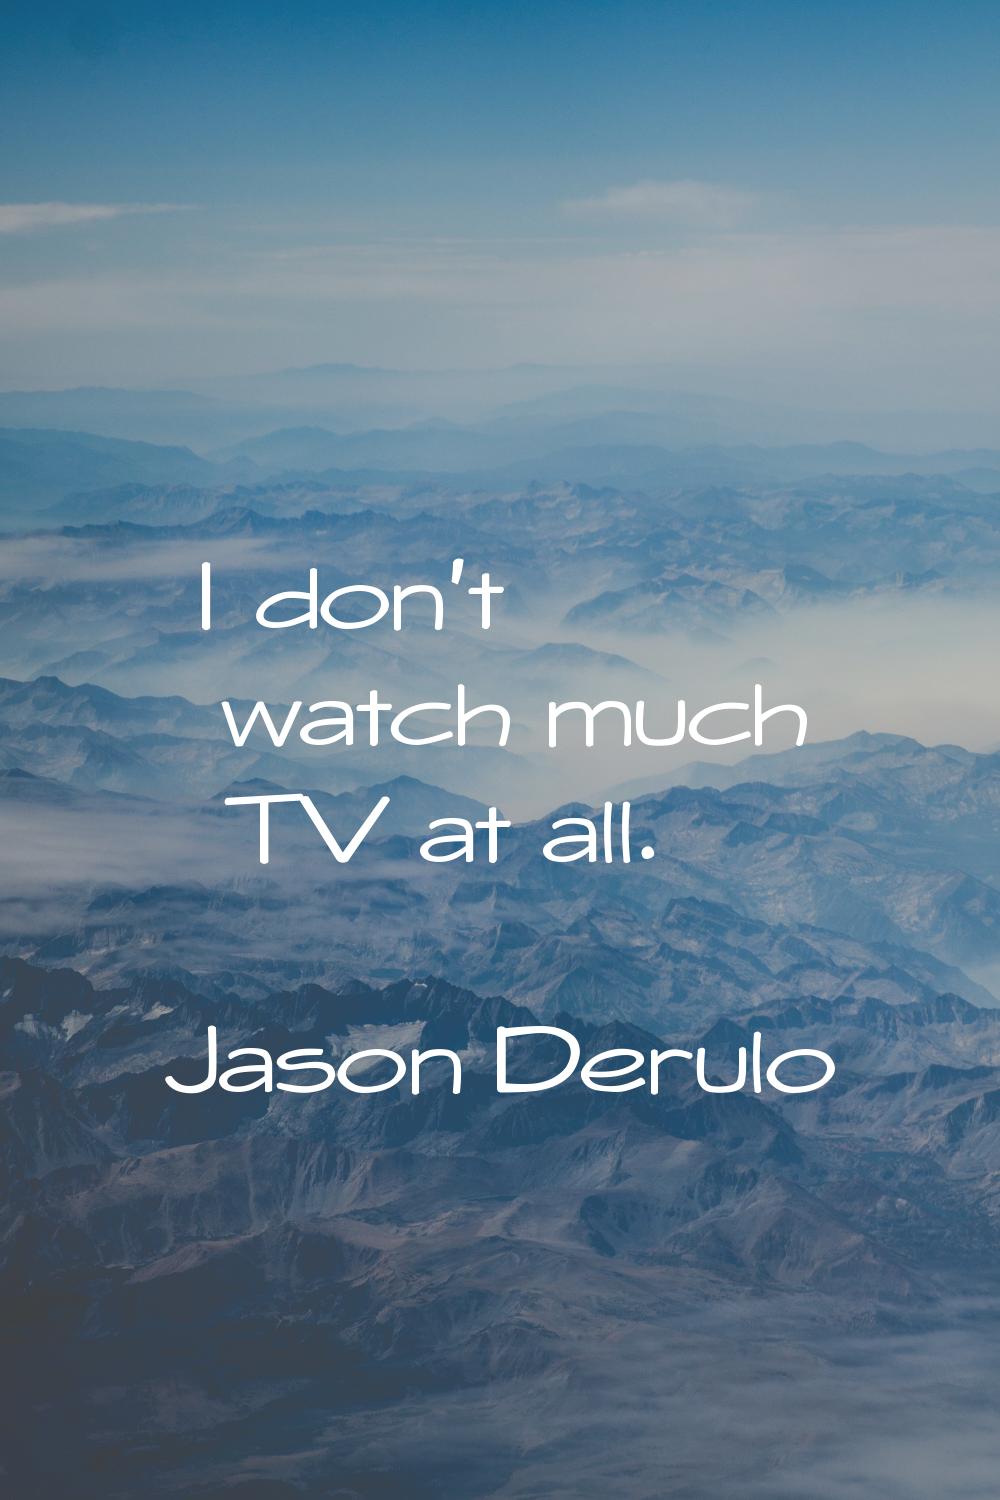 I don't watch much TV at all.